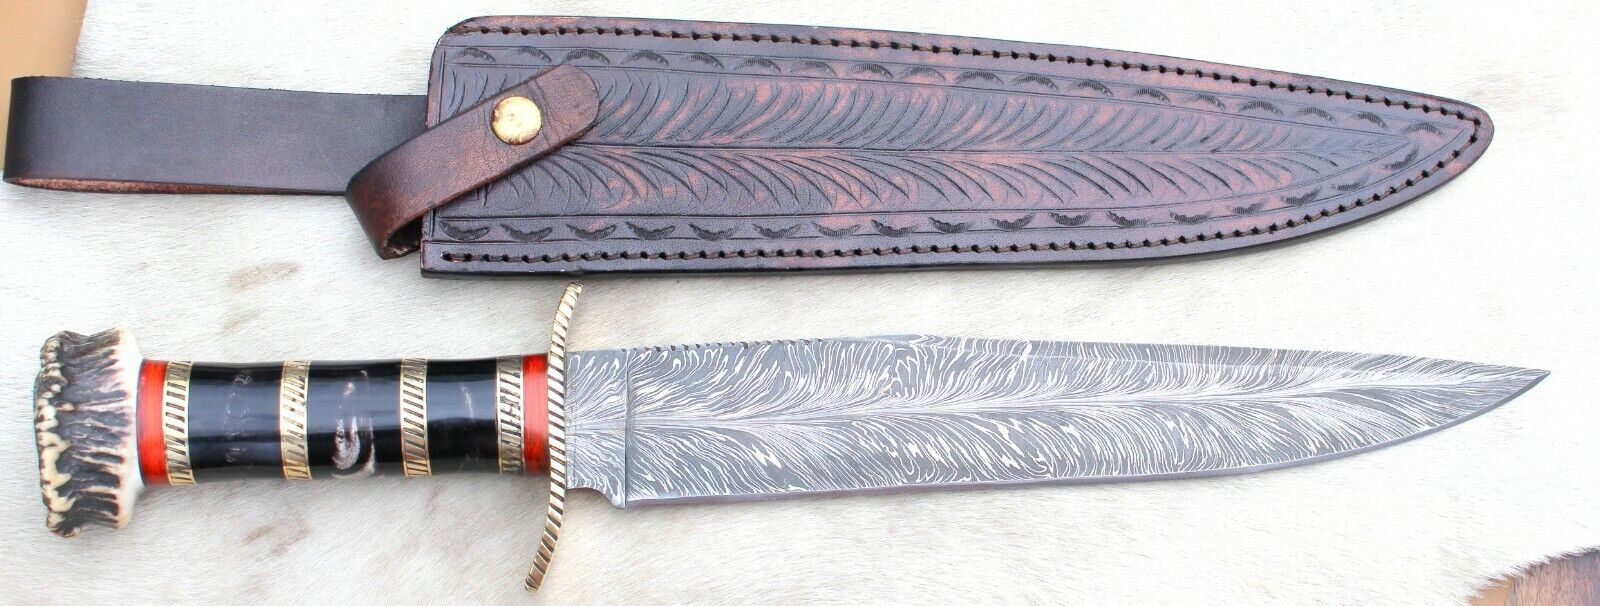 BEAUTIFUL CUSTOM HAND MADE DAMASCUS STEEL HUNTING BOWIE KNIFE HANDLE STAG HORN